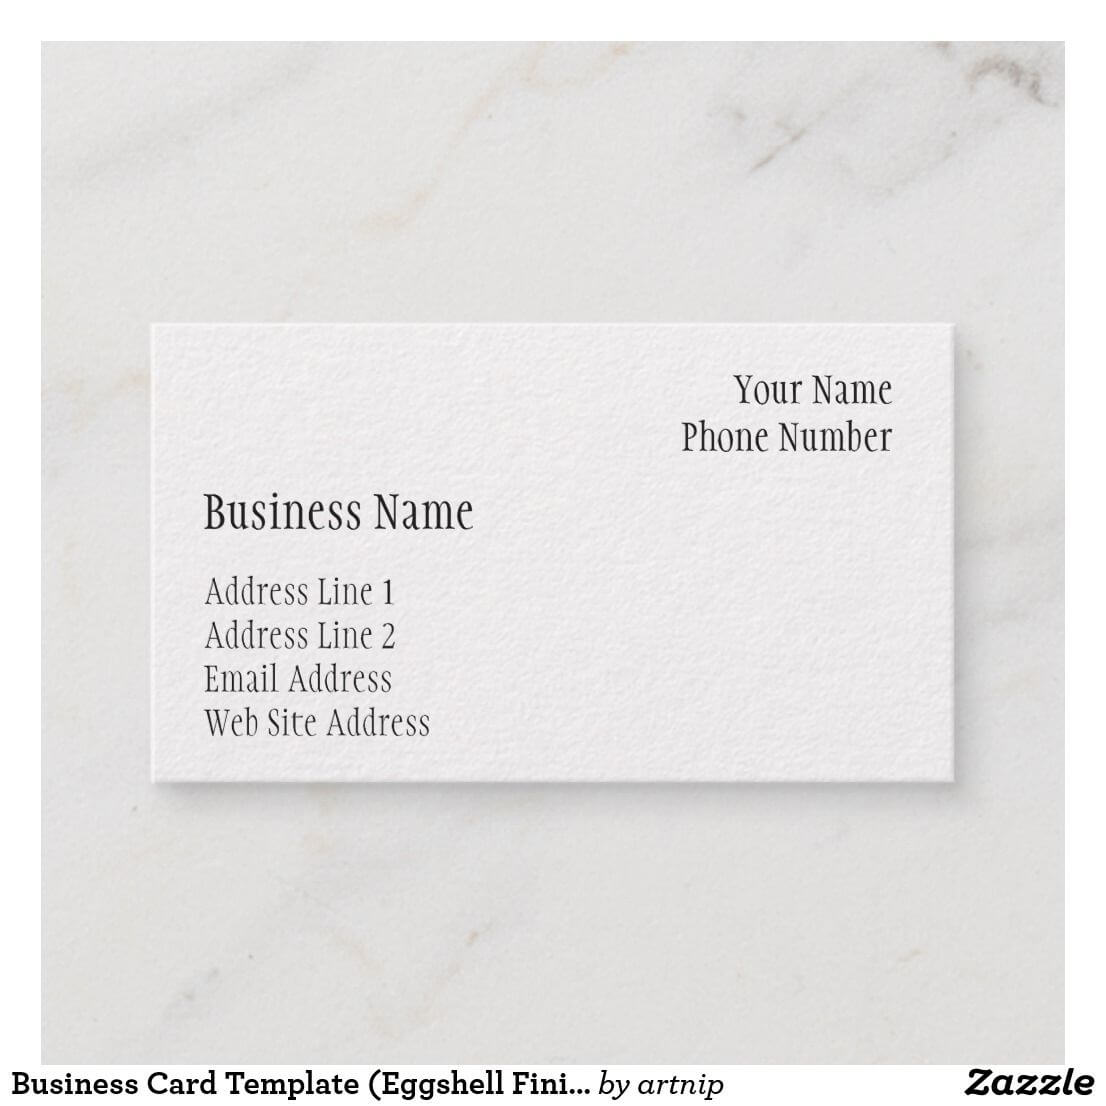 Business Card Template (Eggshell Finish) | Zazzle In With Imprintable Place Cards Template